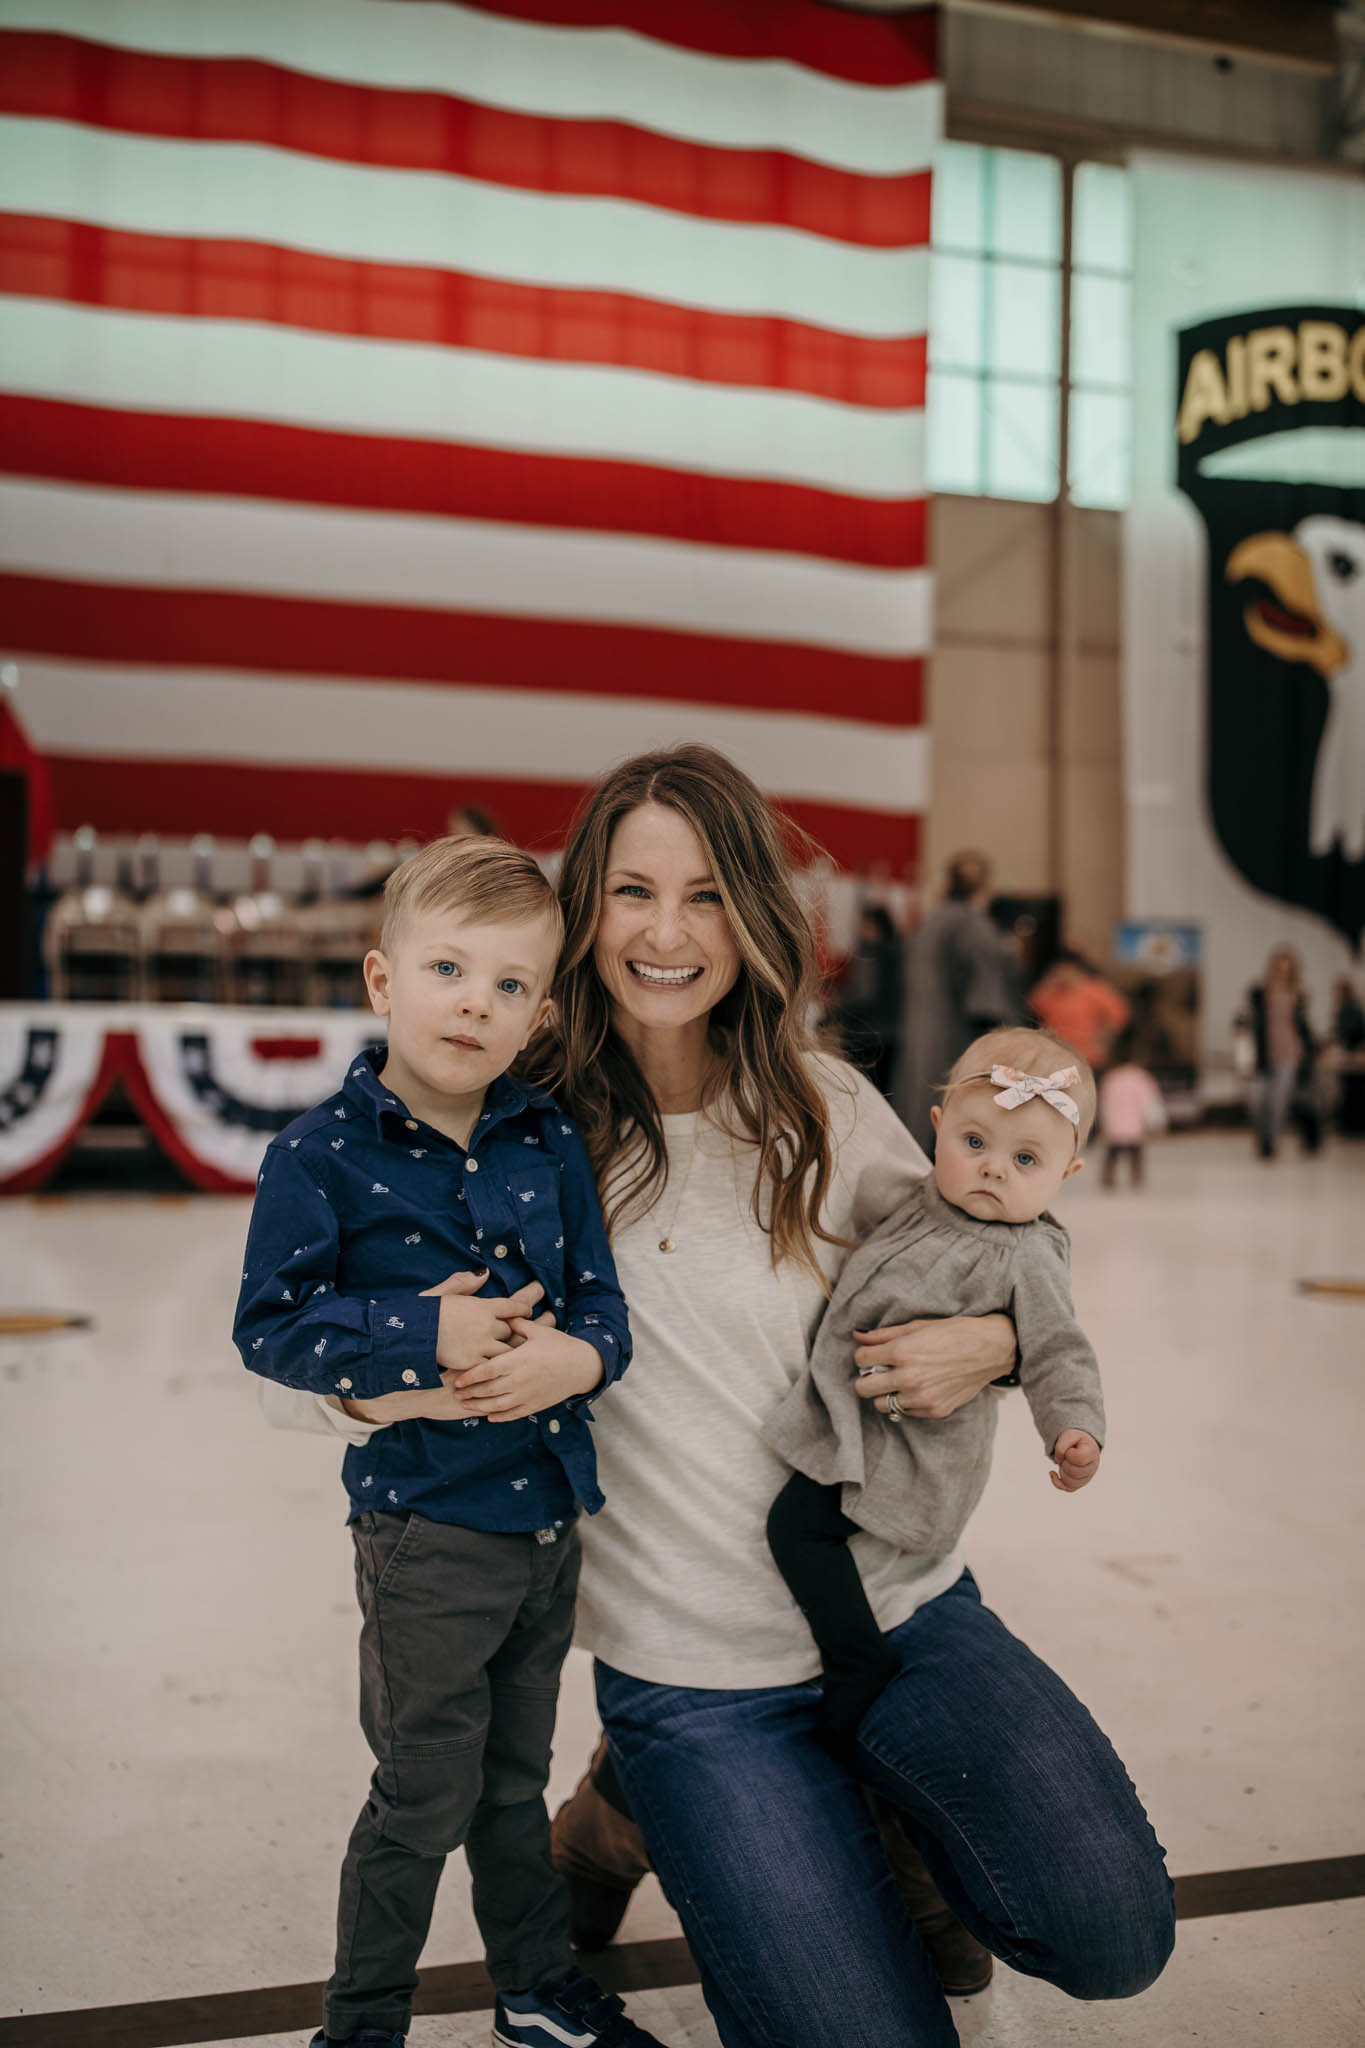 Army Wife Standing with Children infron of Flag